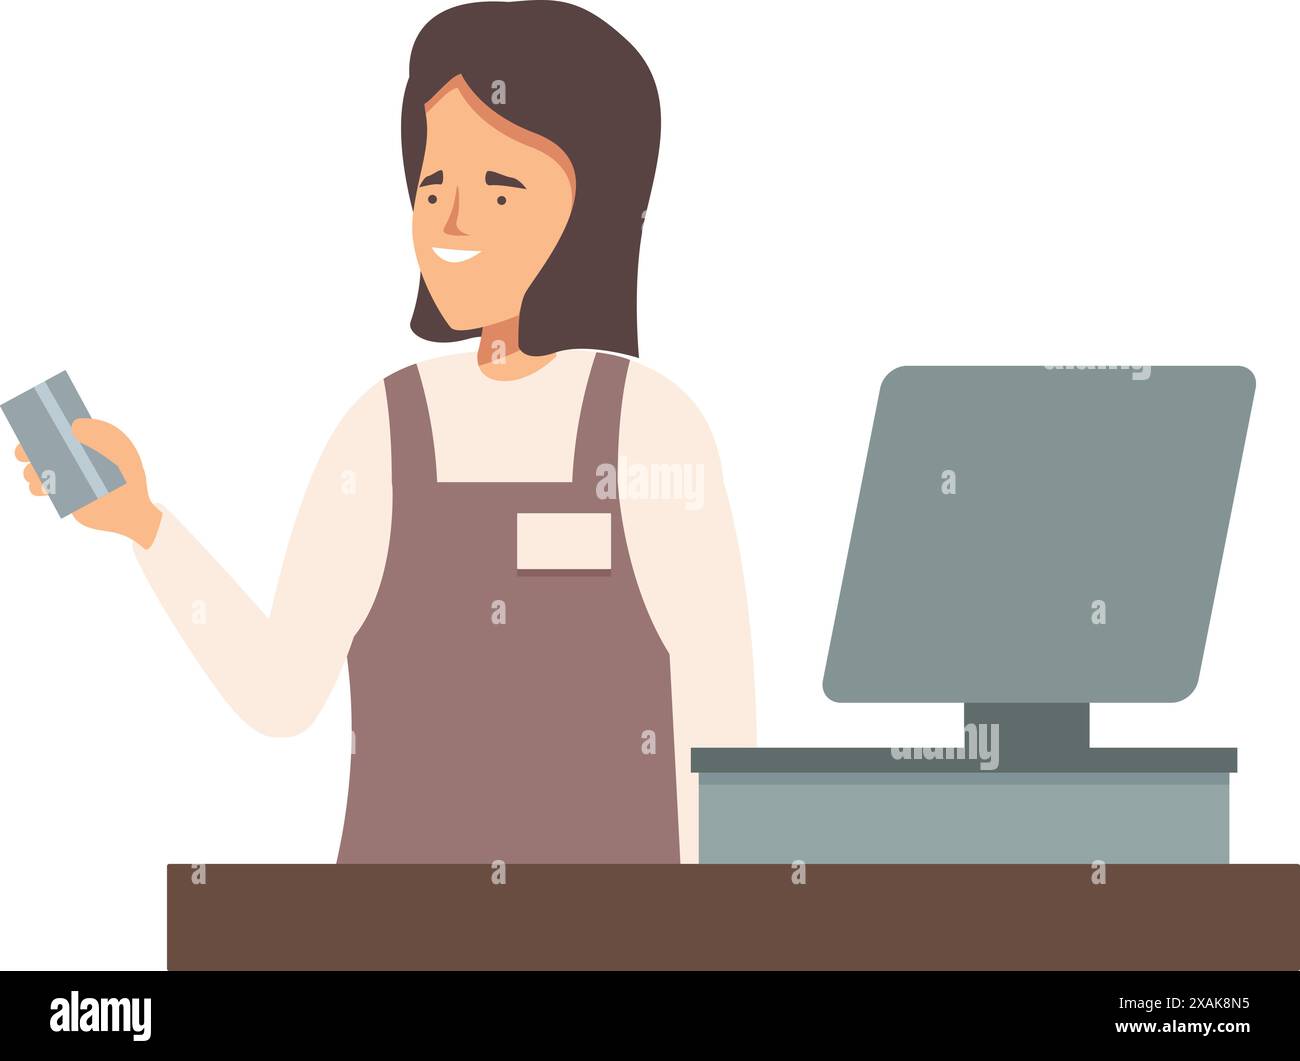 Friendly cashier is holding a credit card, ready to process a payment at the checkout counter Stock Vector